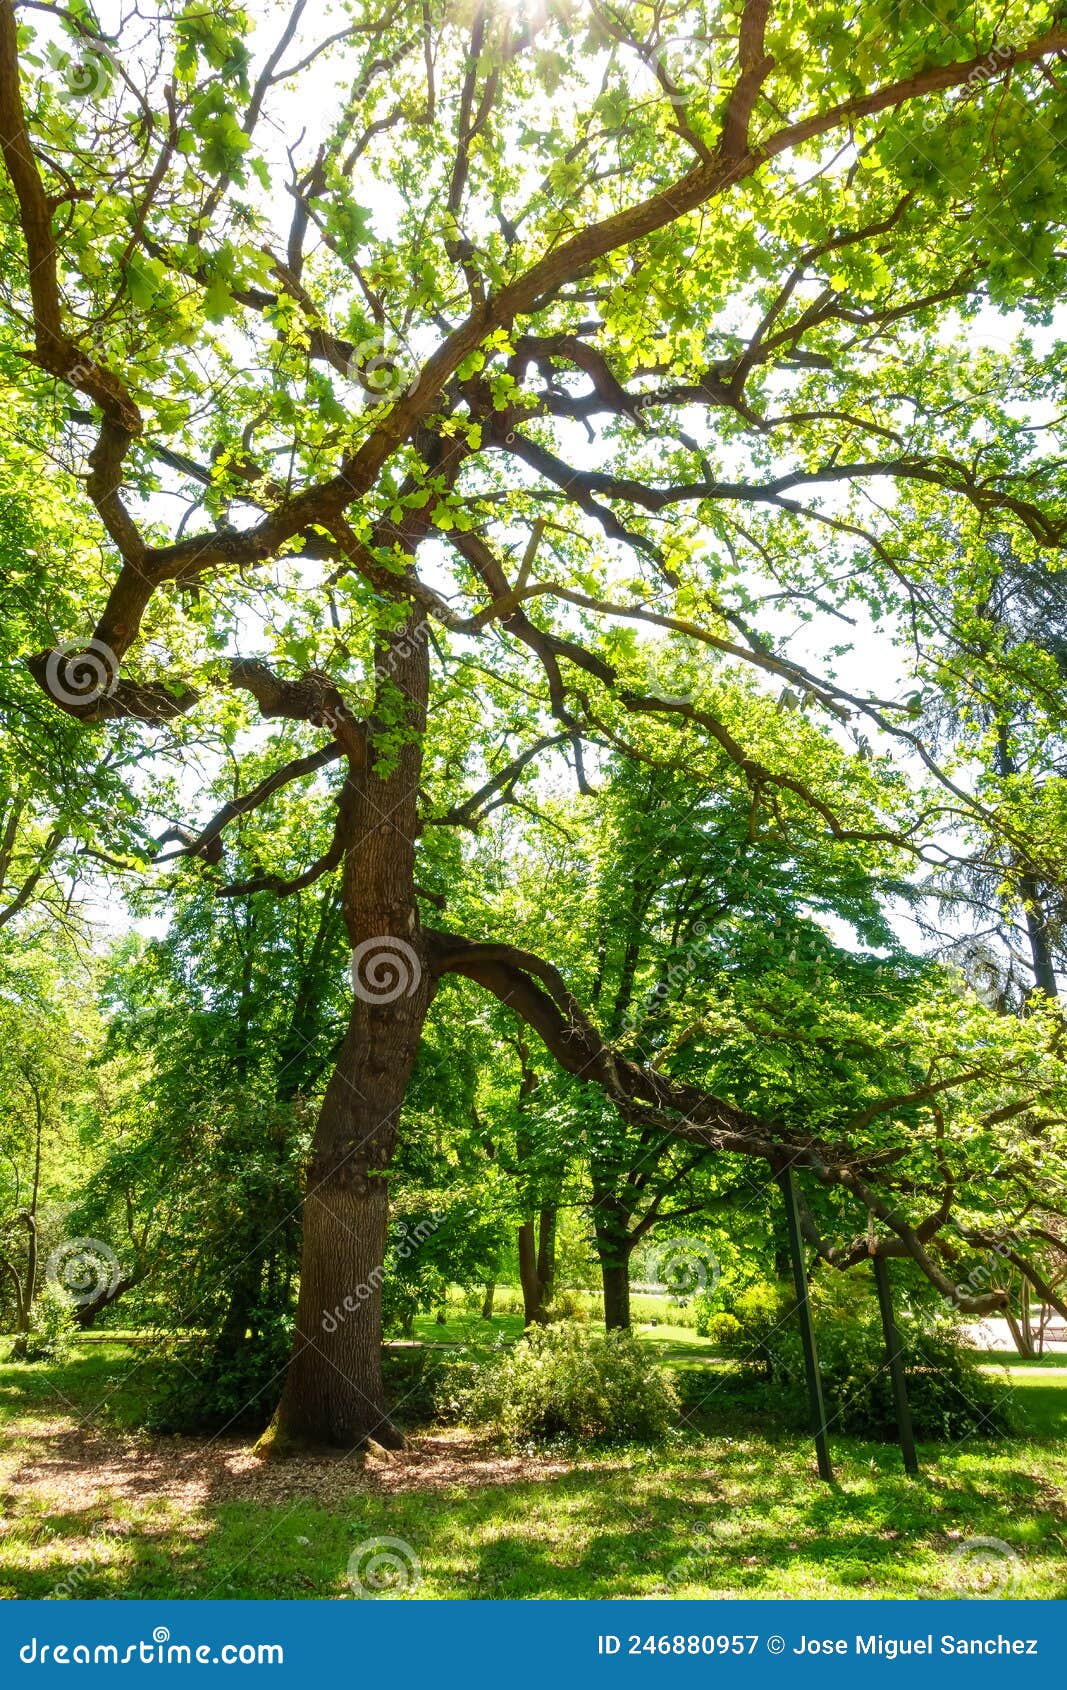 millenary oak with more than two thousand years of age in the campo del moro park in madrid.